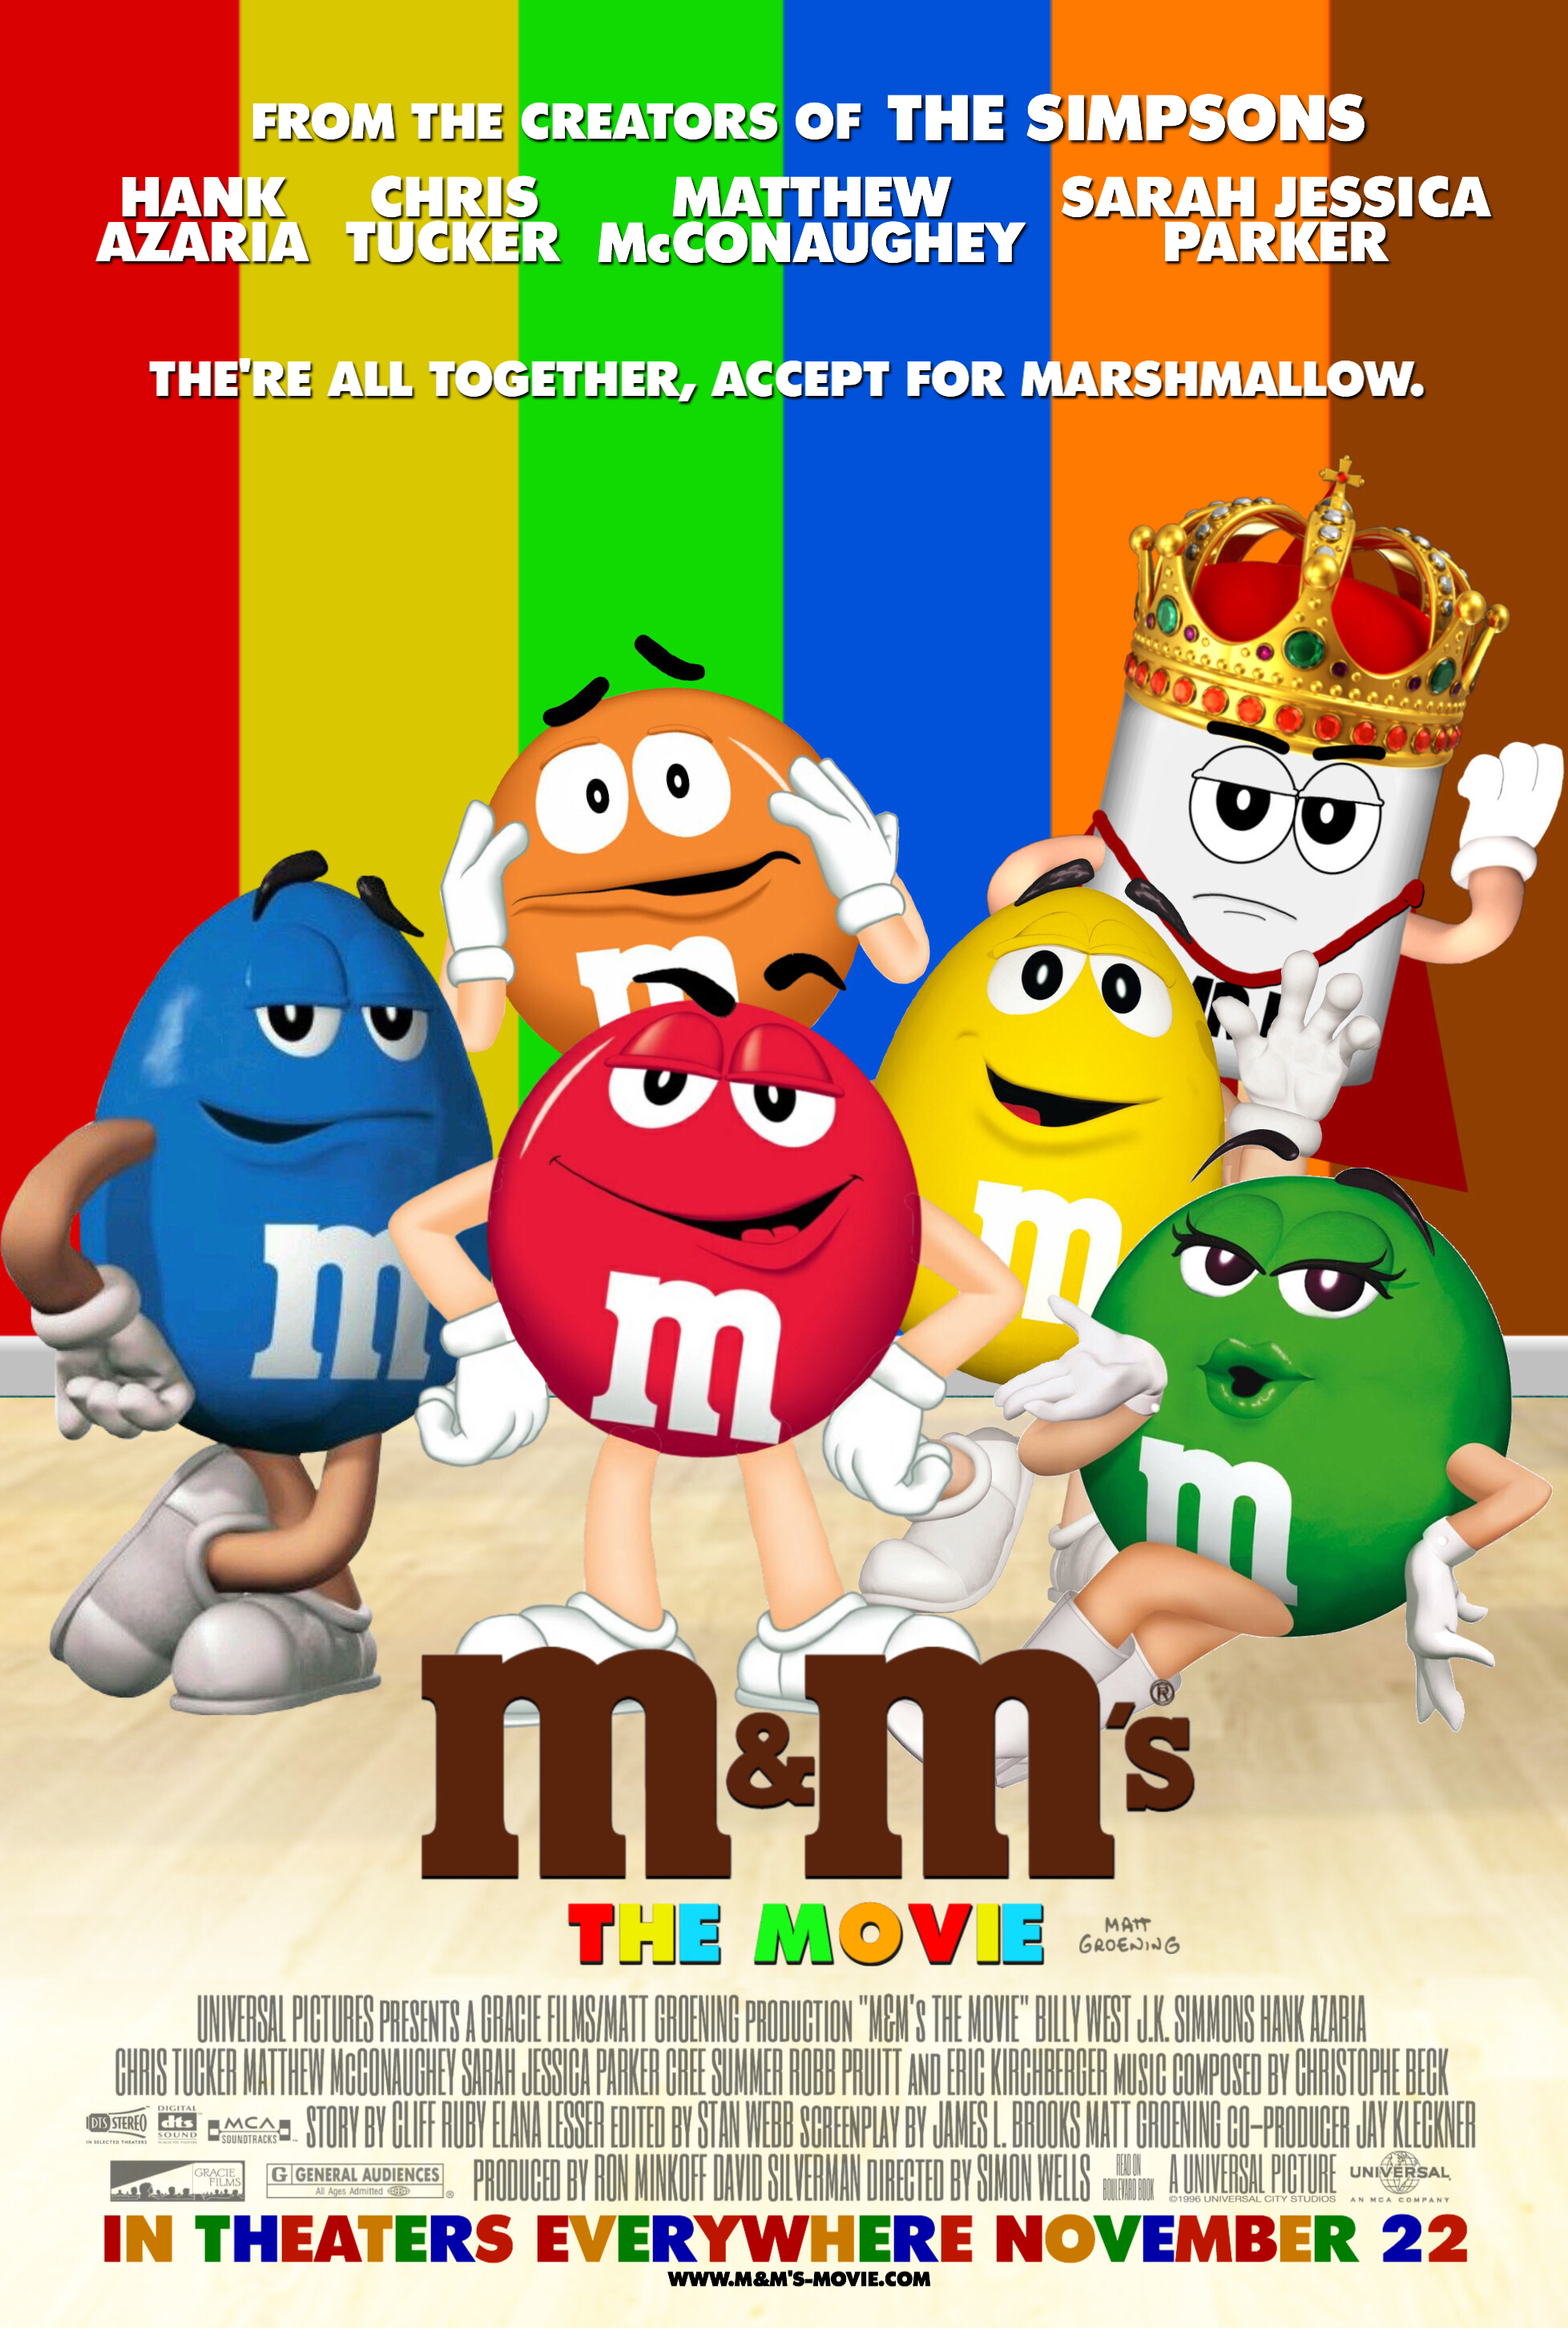 Ranking The M&Ms Cartoon Cast By Rootability, Because Why Not